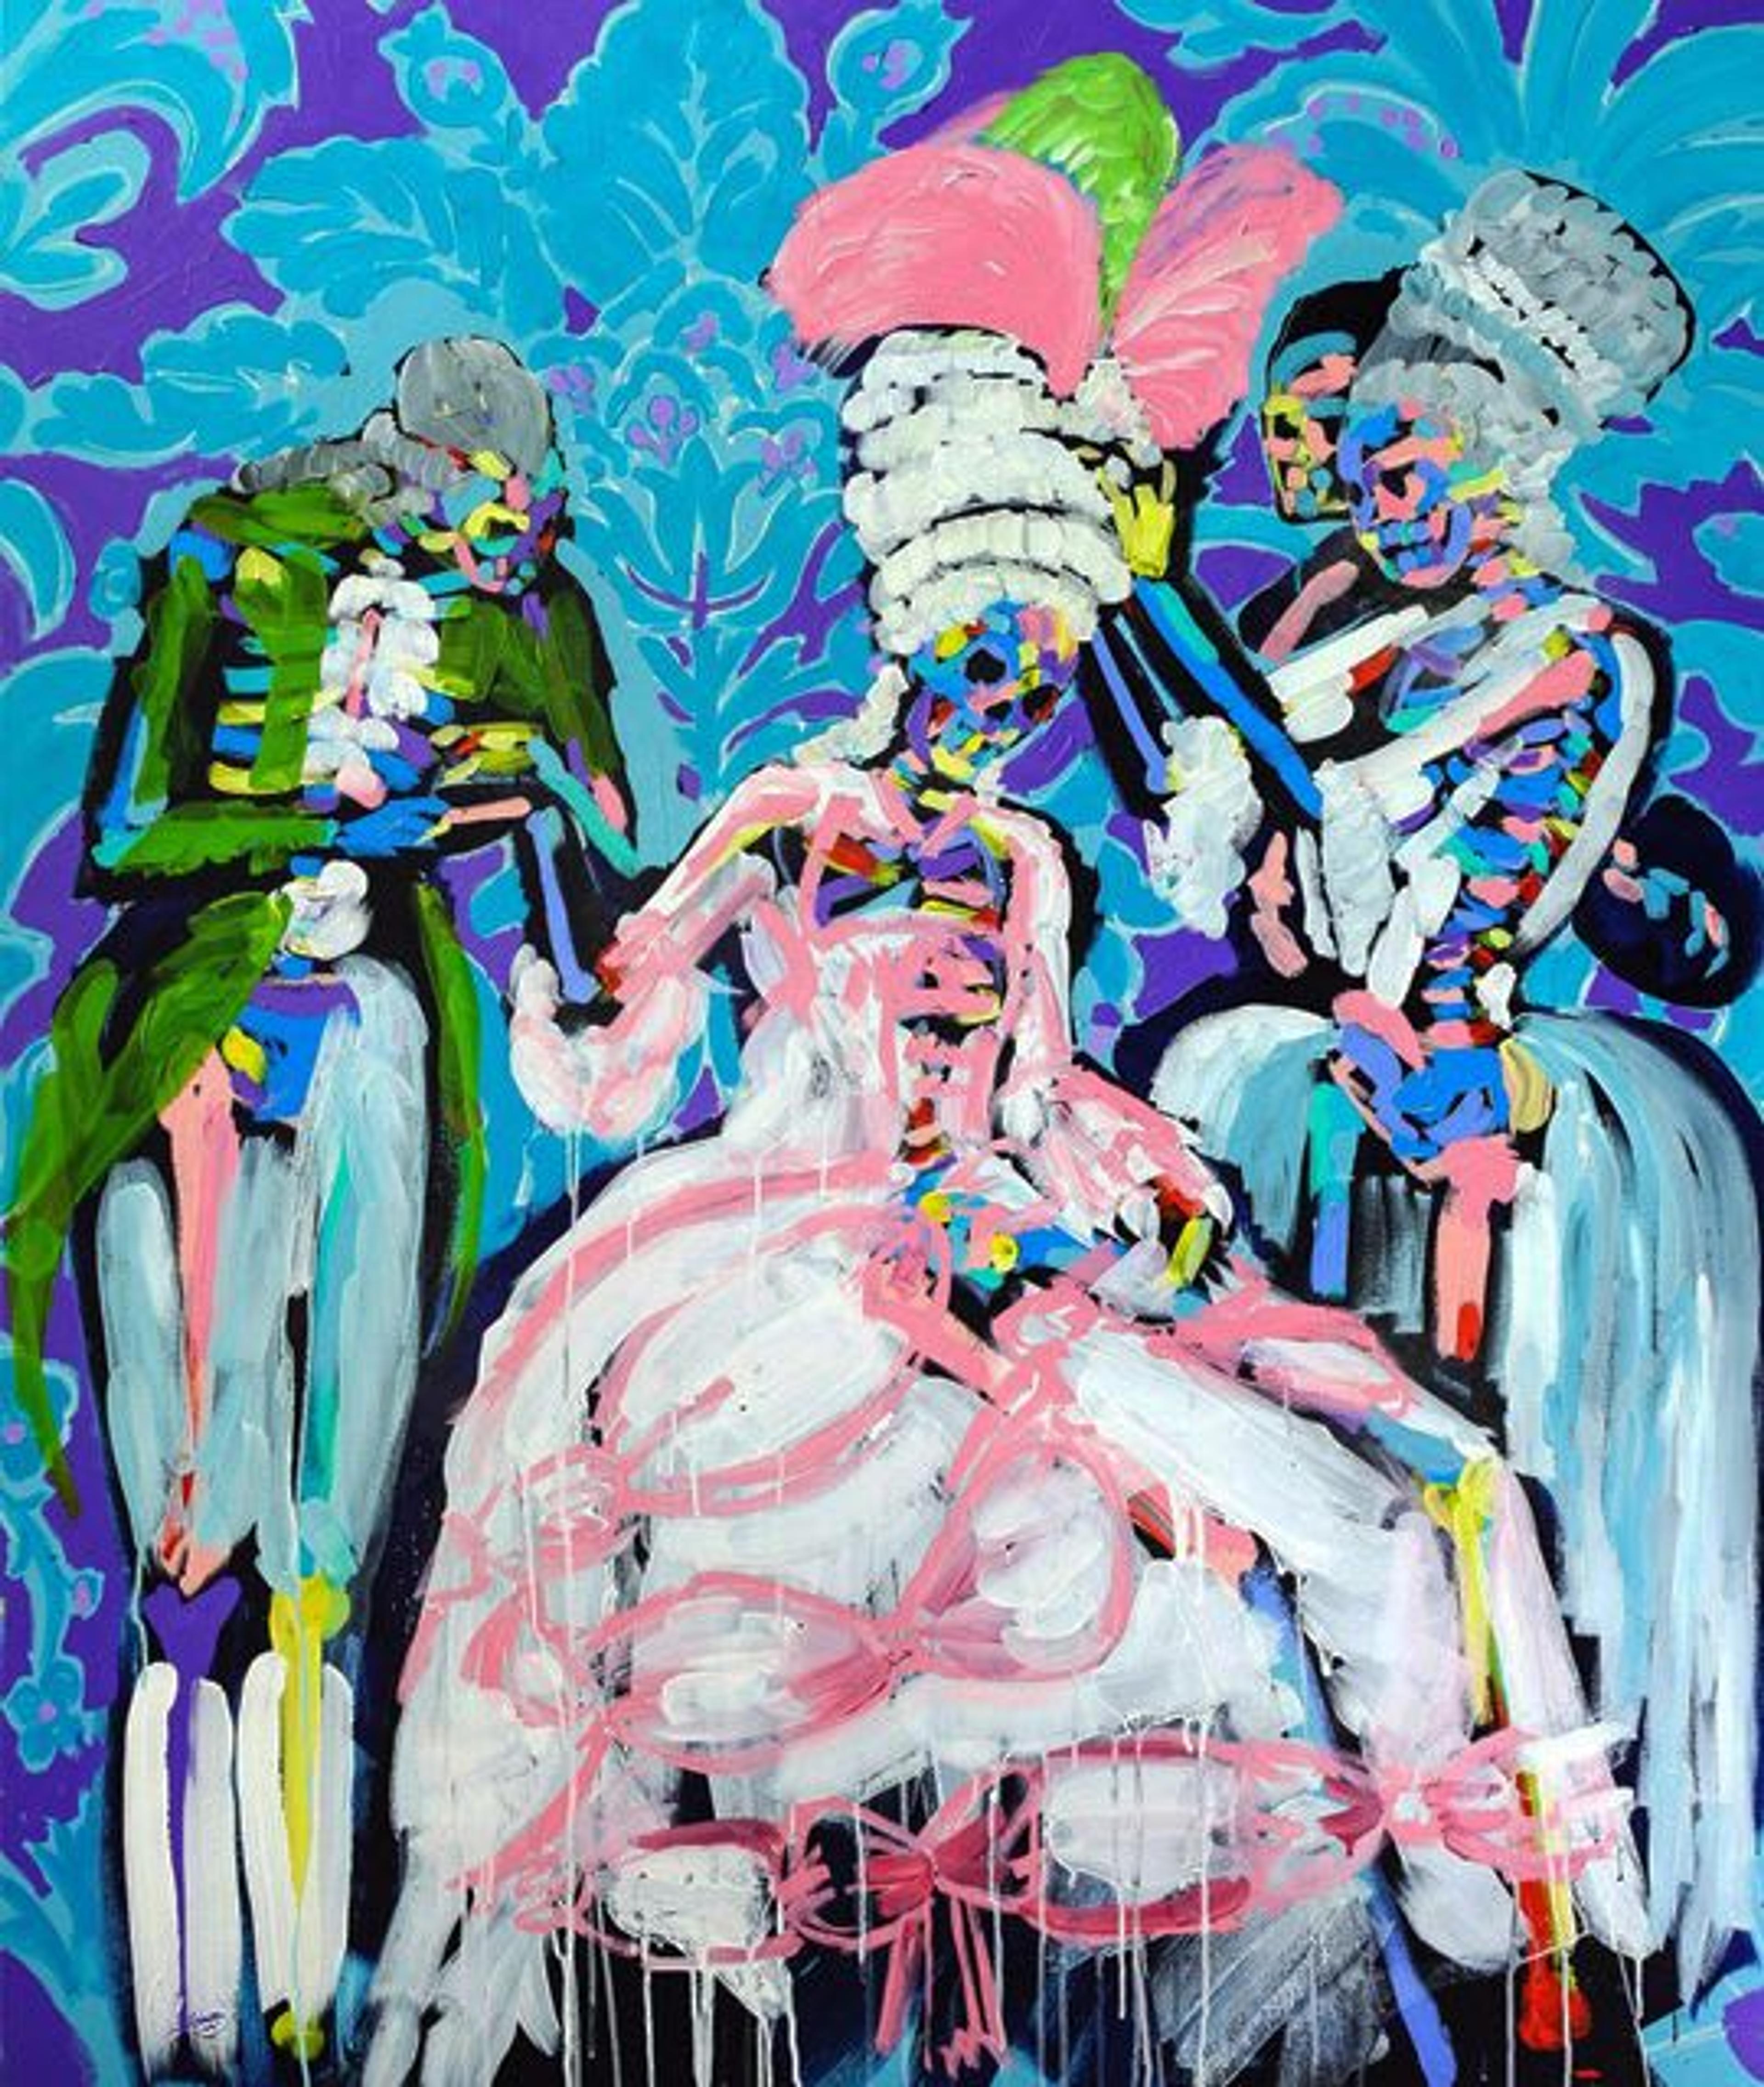 Bradley Theodore, 'Marie On The Way To The Ball', 2017, Galerie Maddox.